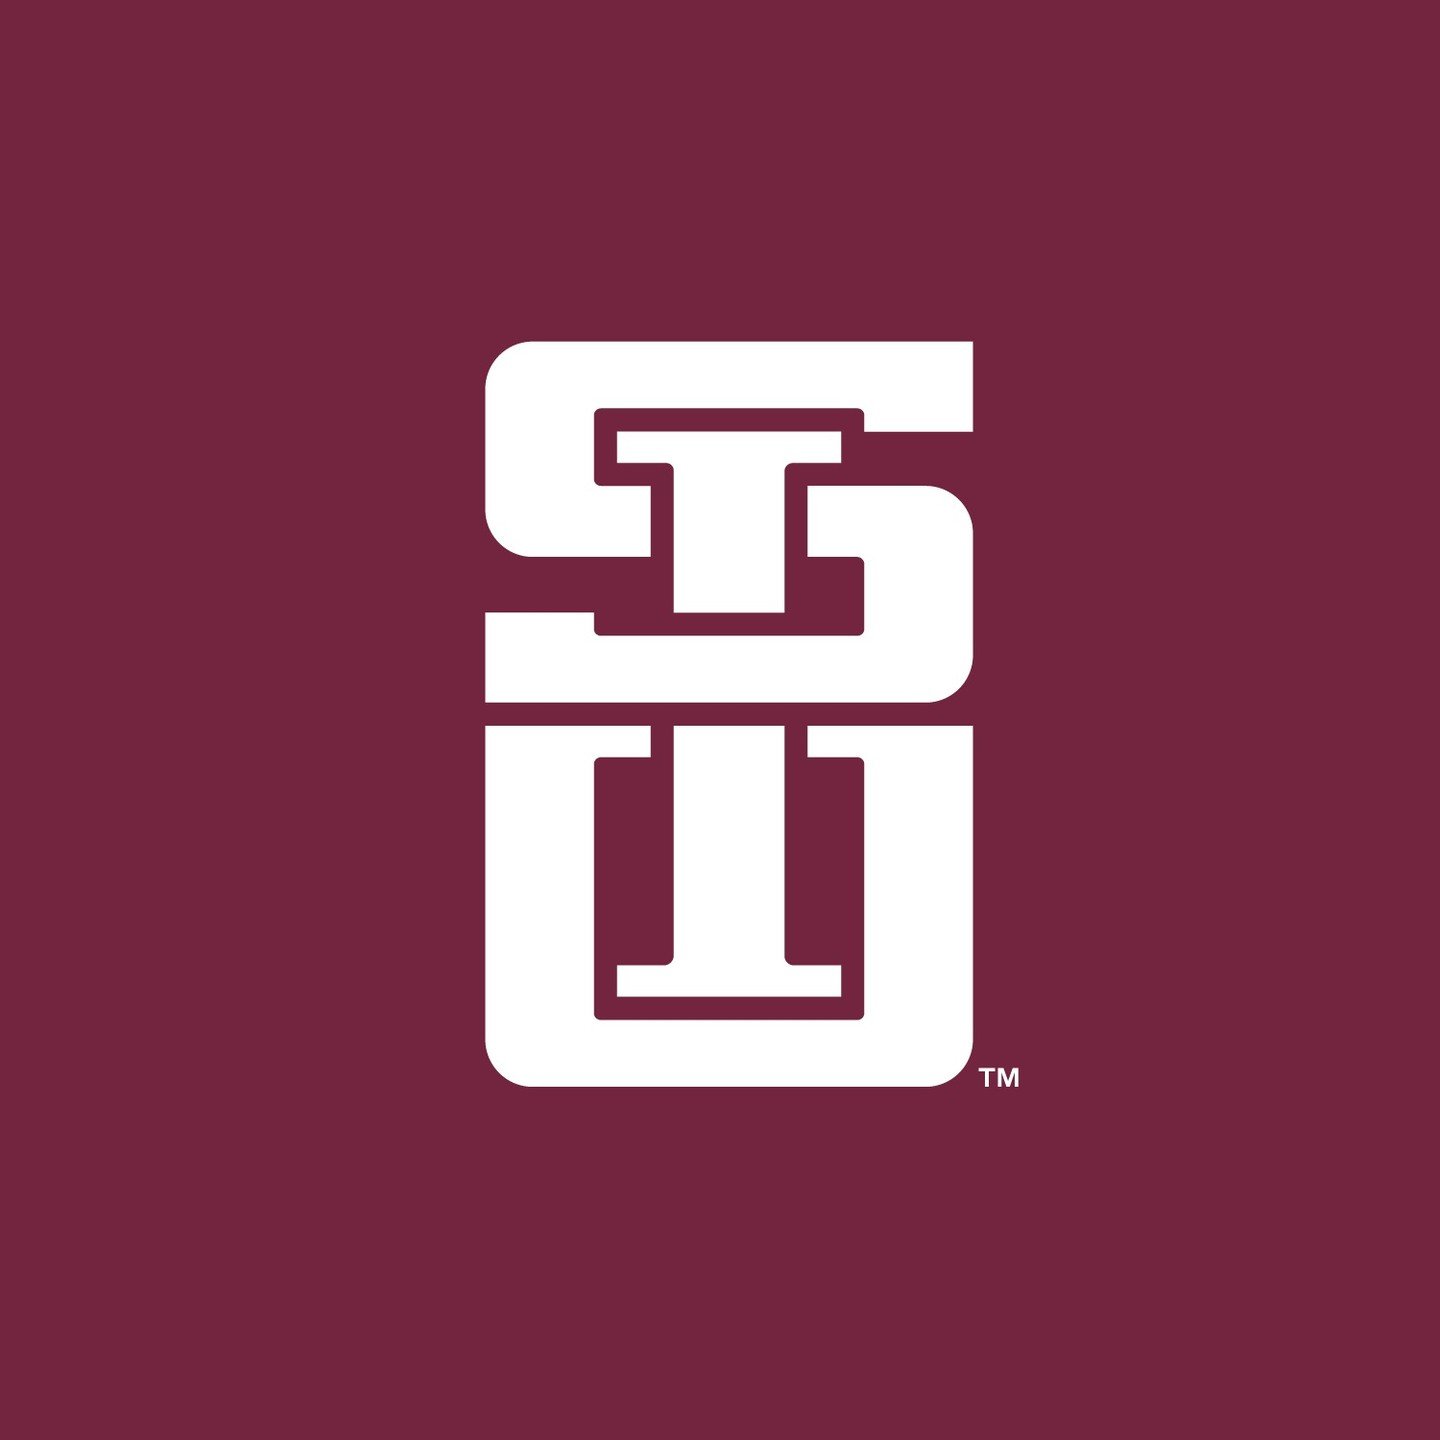 We're happy to see this Torch-designed monogram being integrated more and more! 
@siusalukis 
 #SportsLogoDesign